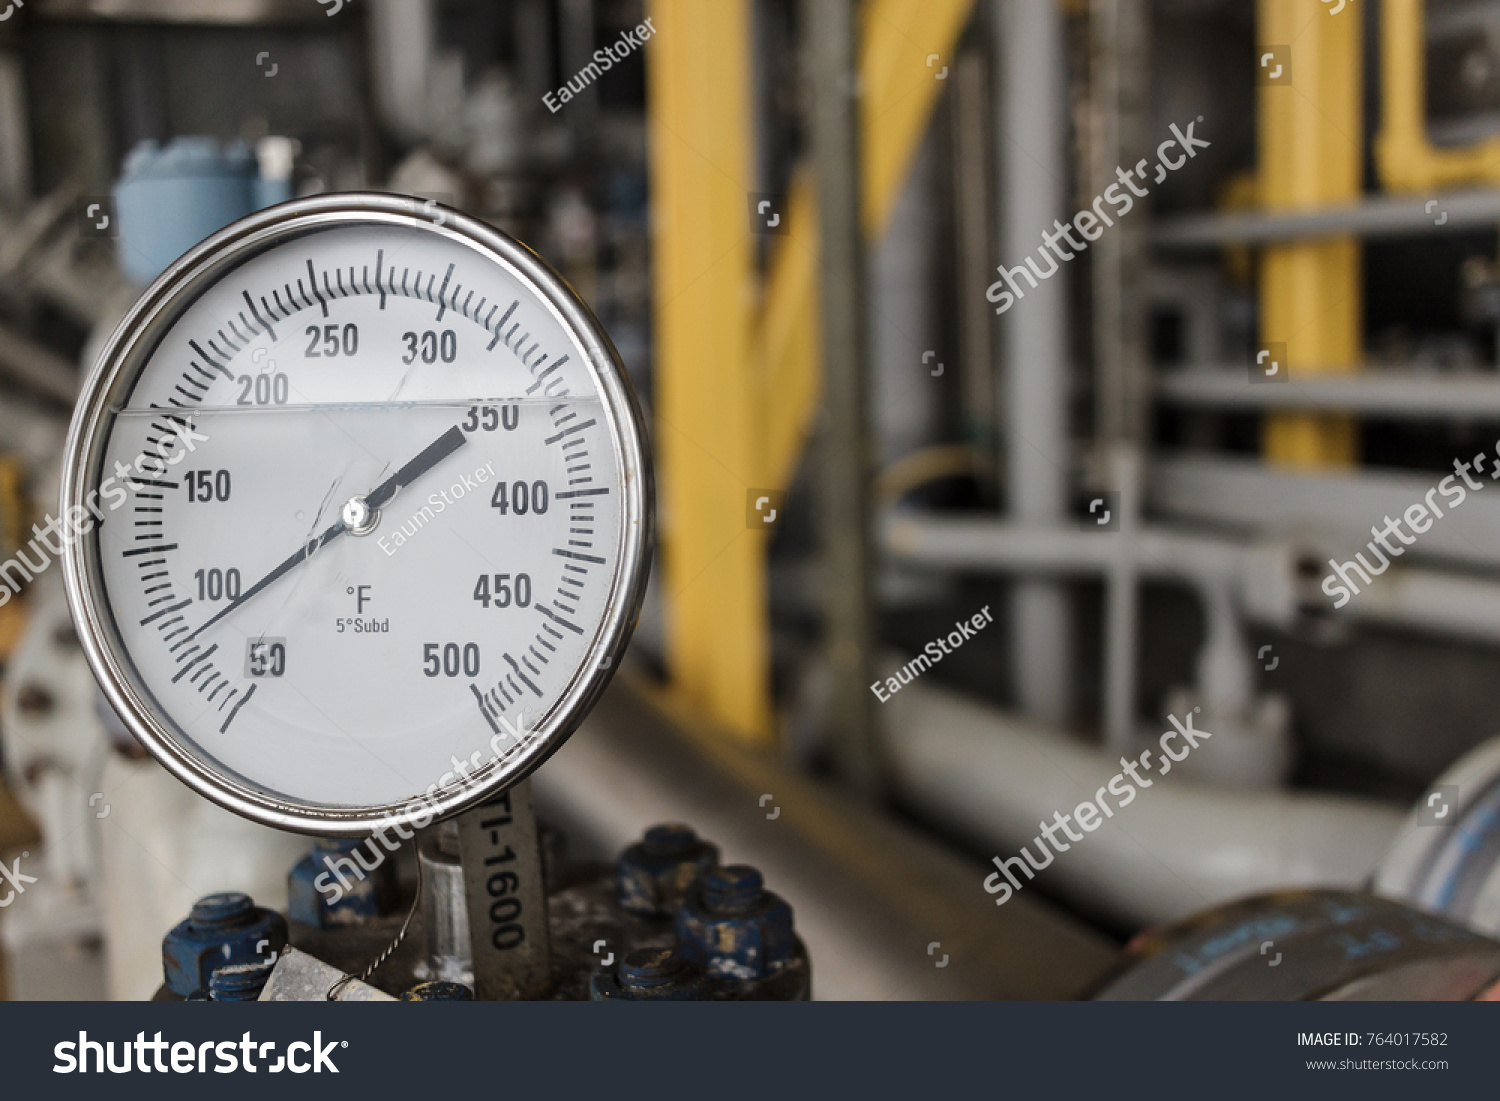 Thermometer, Temperature gauge or temperature indicator reading eighty five Fahrenheit (°F) in offshore oil and gas refinery process operation industry. #764017582